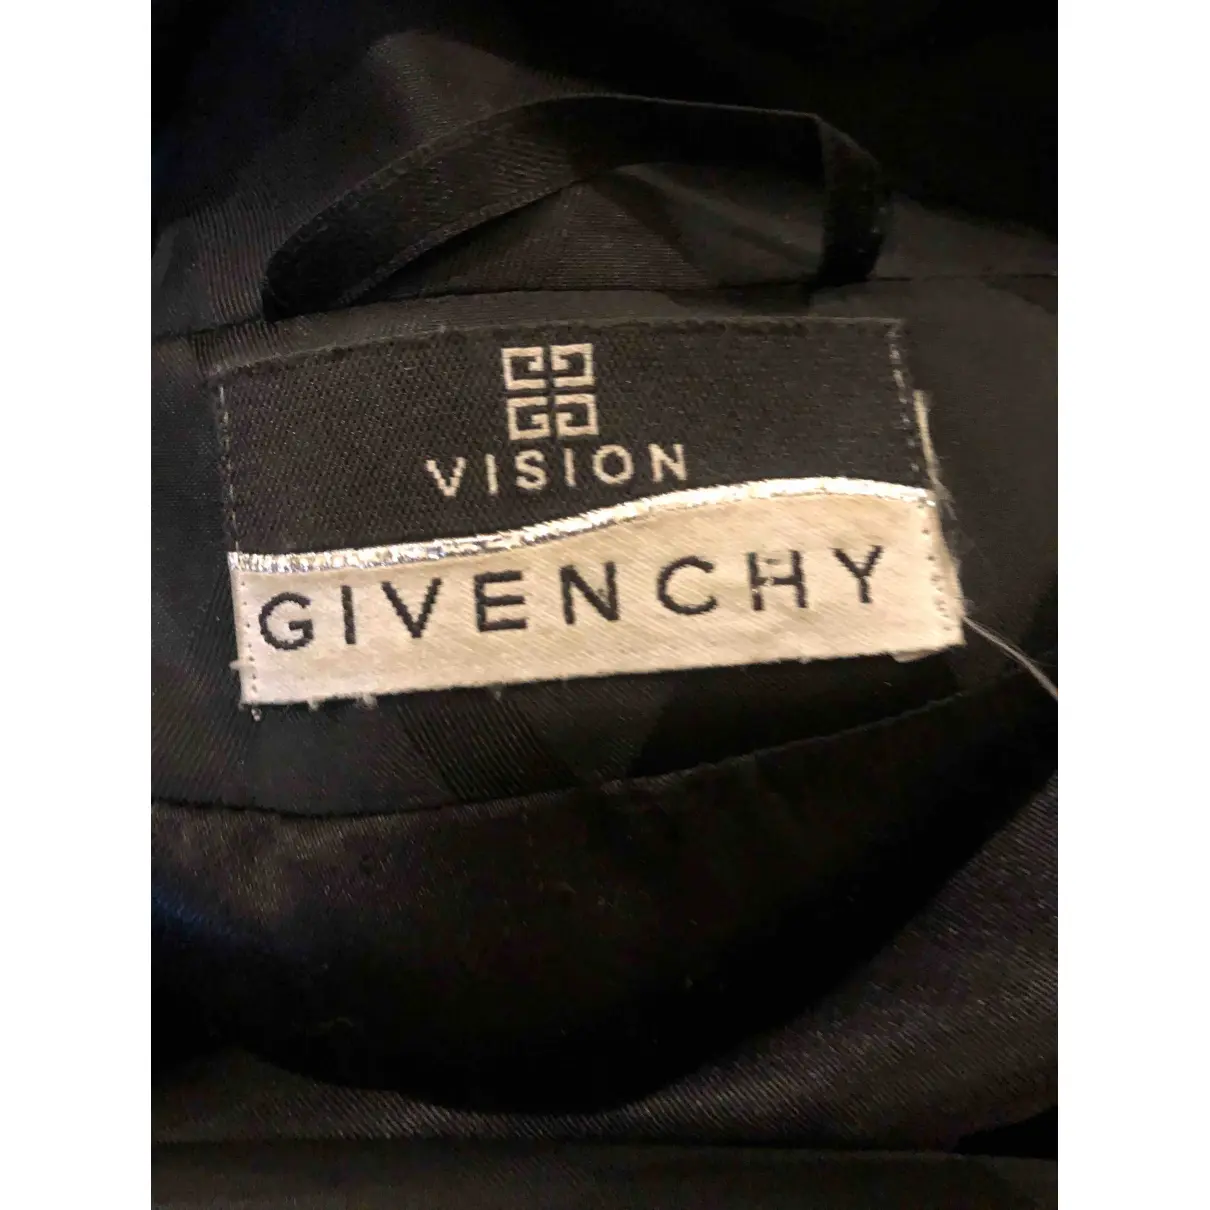 Buy Givenchy Trench coat online - Vintage